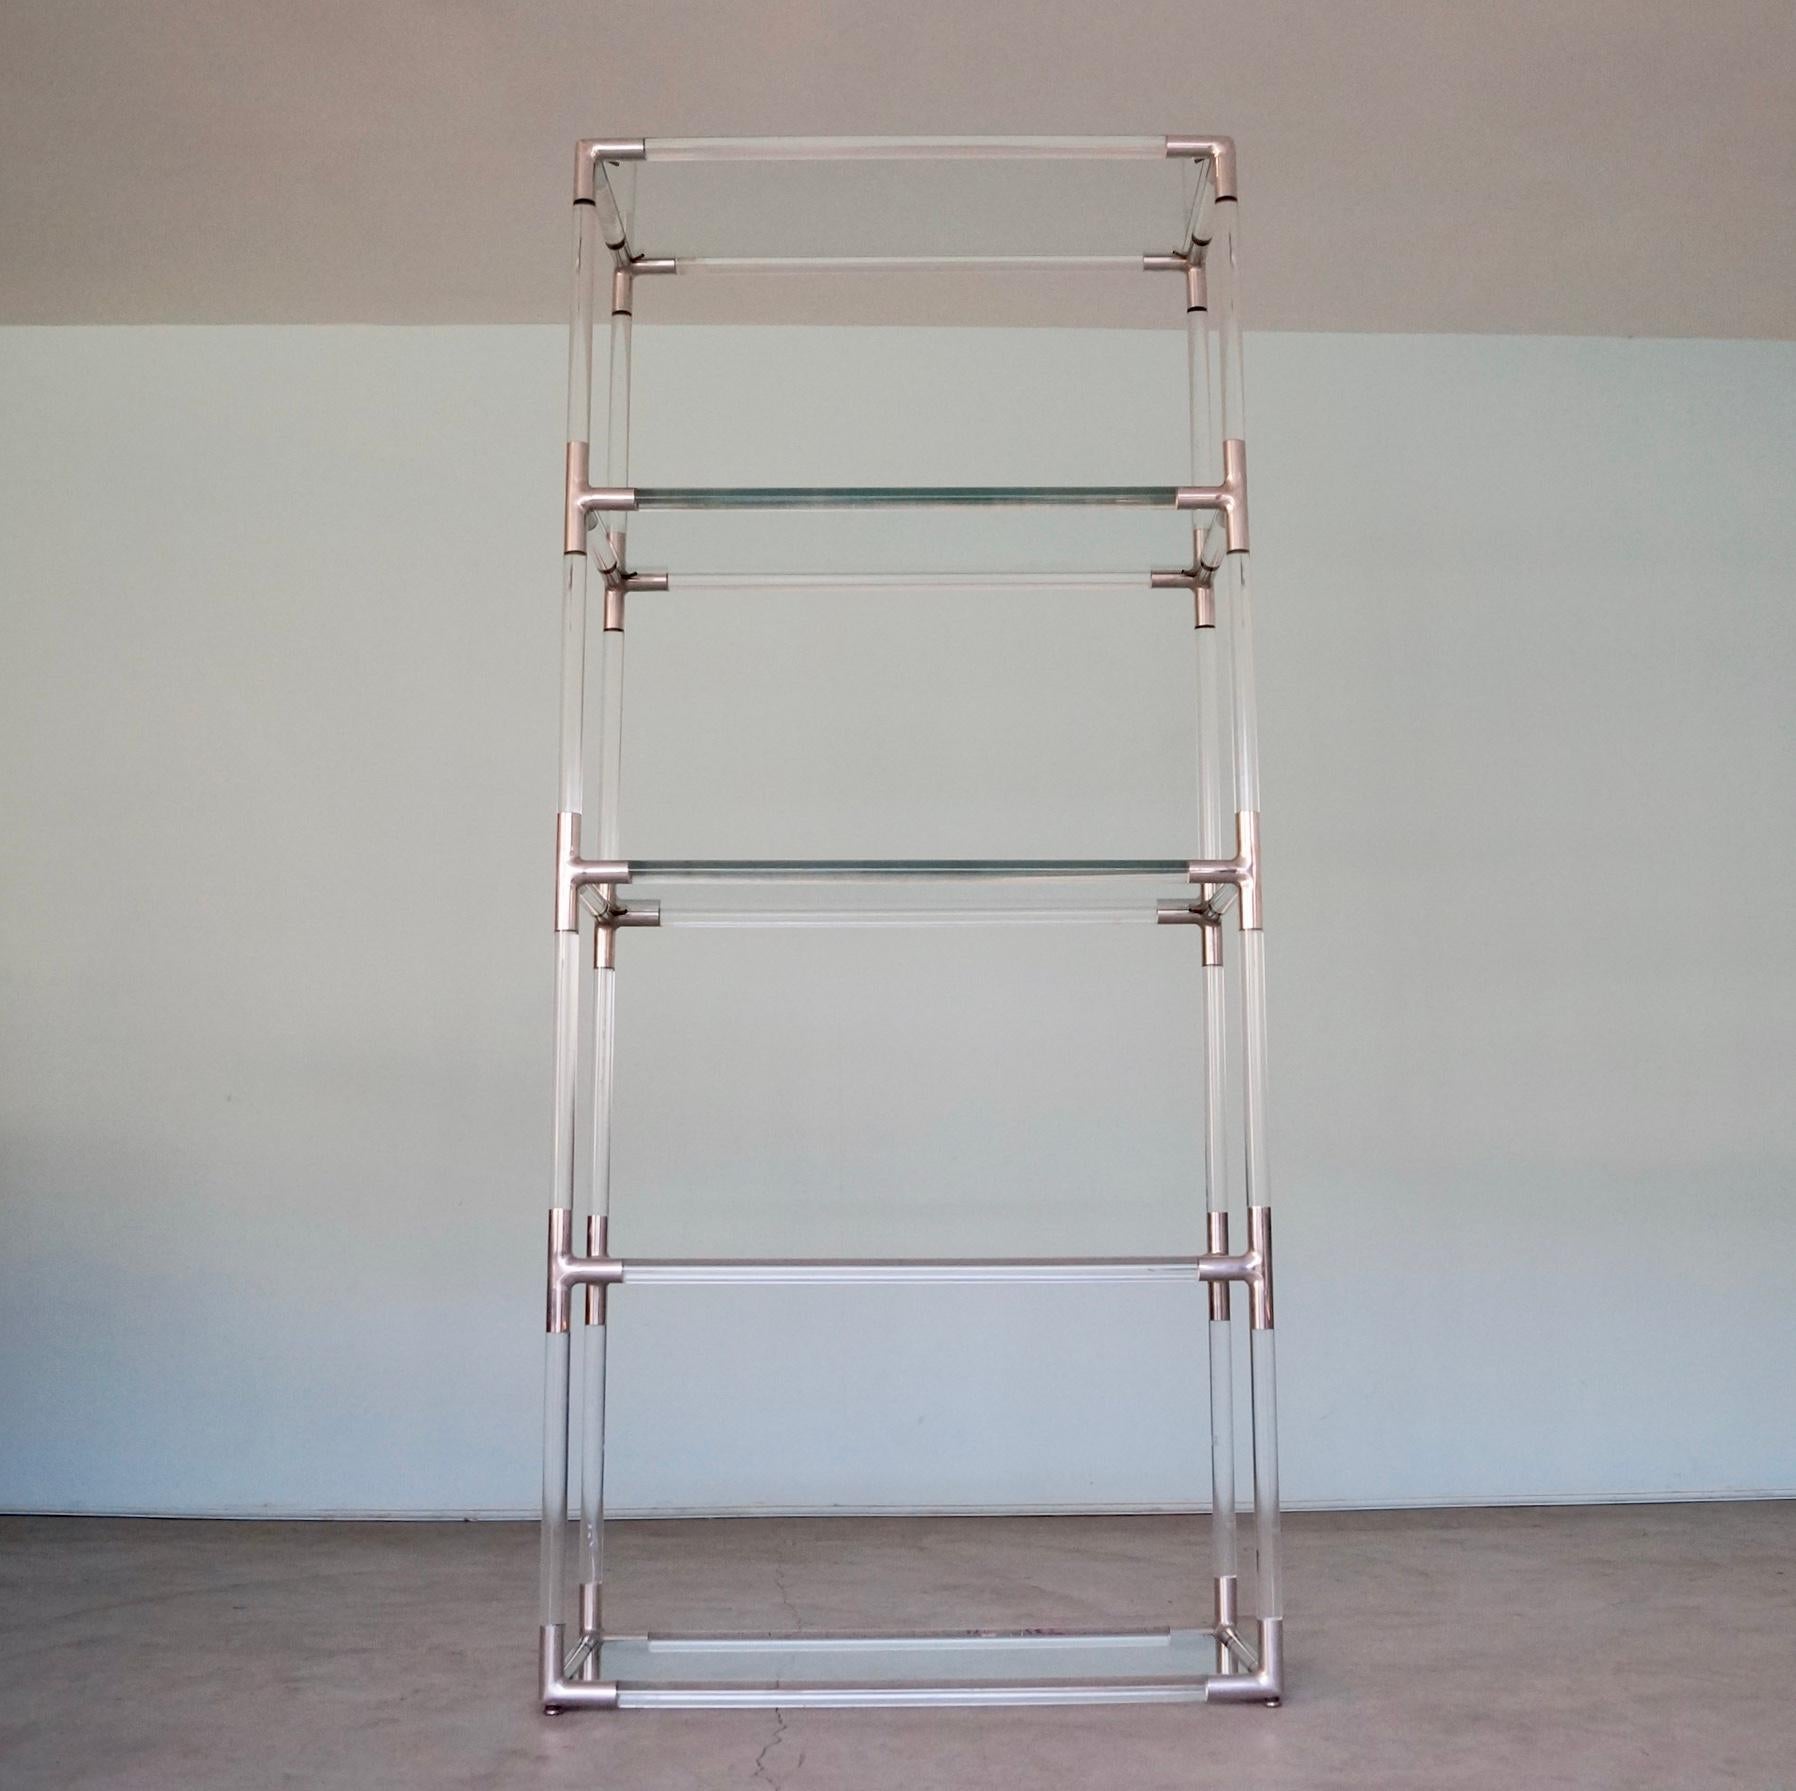 We have this monumental original Mid-Century Modern shelf for sale. It's an original designer etagere by in the manner of lucite king Charles Hollis Jones. It's in amazing showroom condition, and a gorgeous work of art! It's made of lucite with